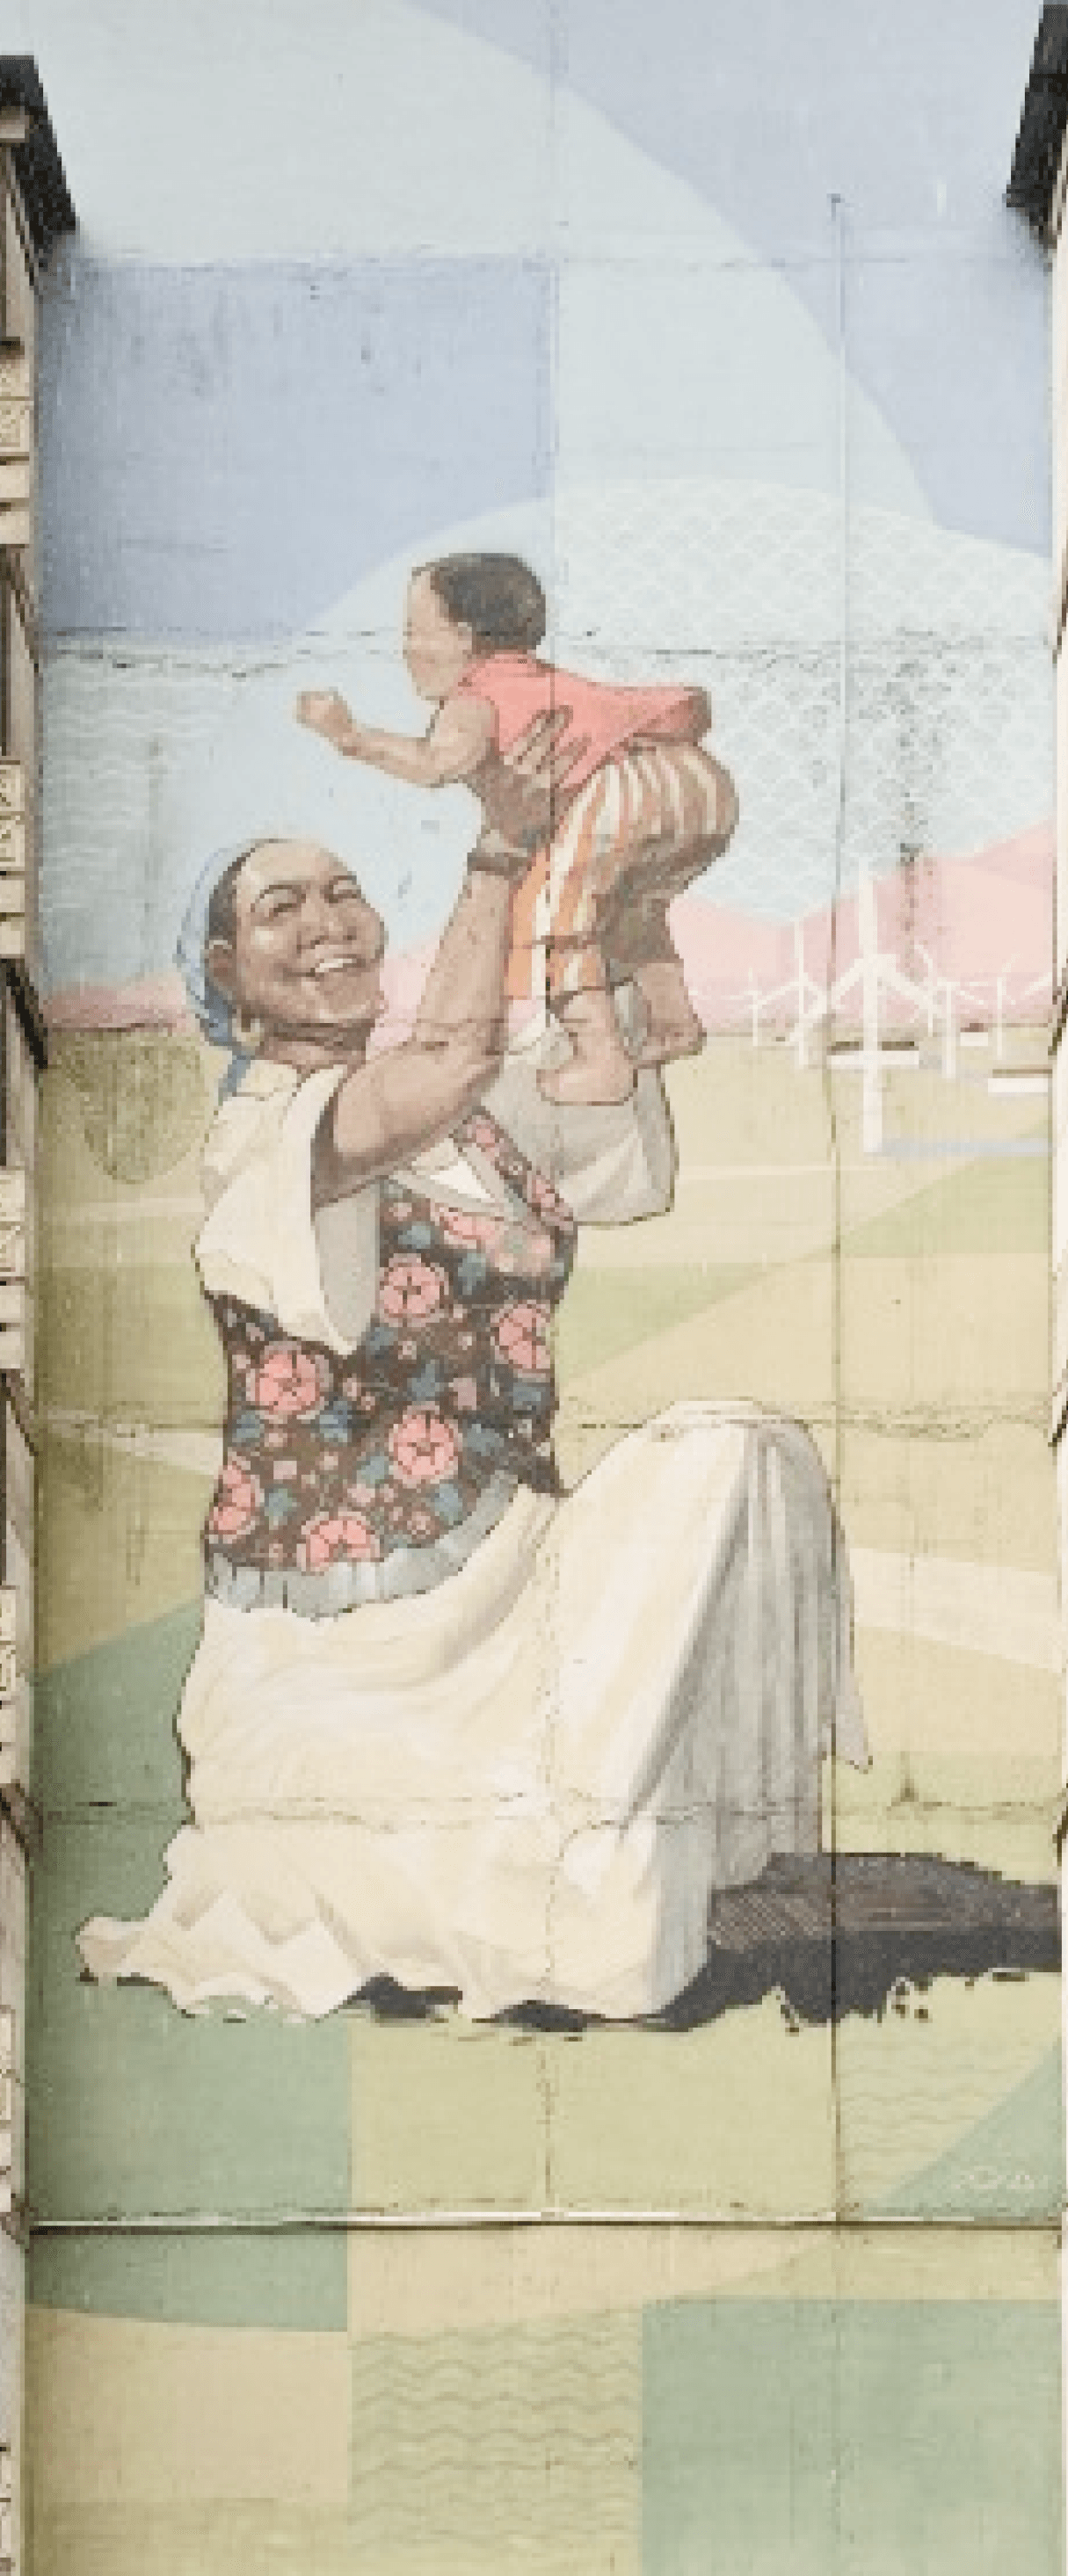 A photo of a mural on old soviet building in Kazakhstan depicting a mother holding a child up in the air.